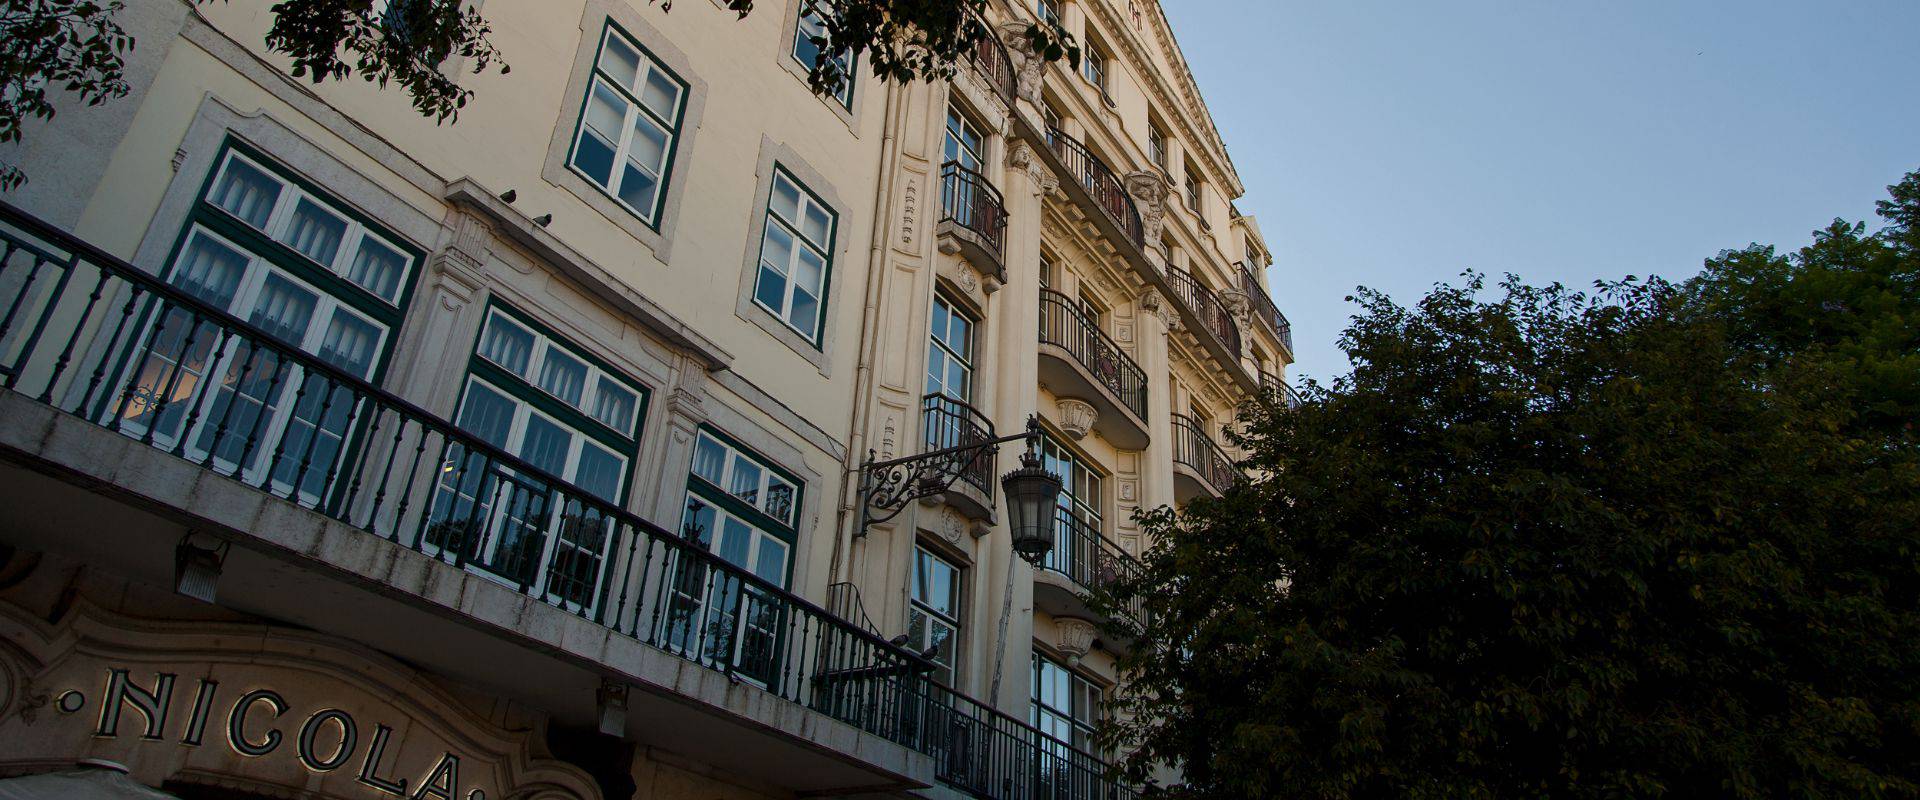 Welcome to a refined centenarian boutique hotel on old lisbon’s central square  Métropole Hotel Lisbon